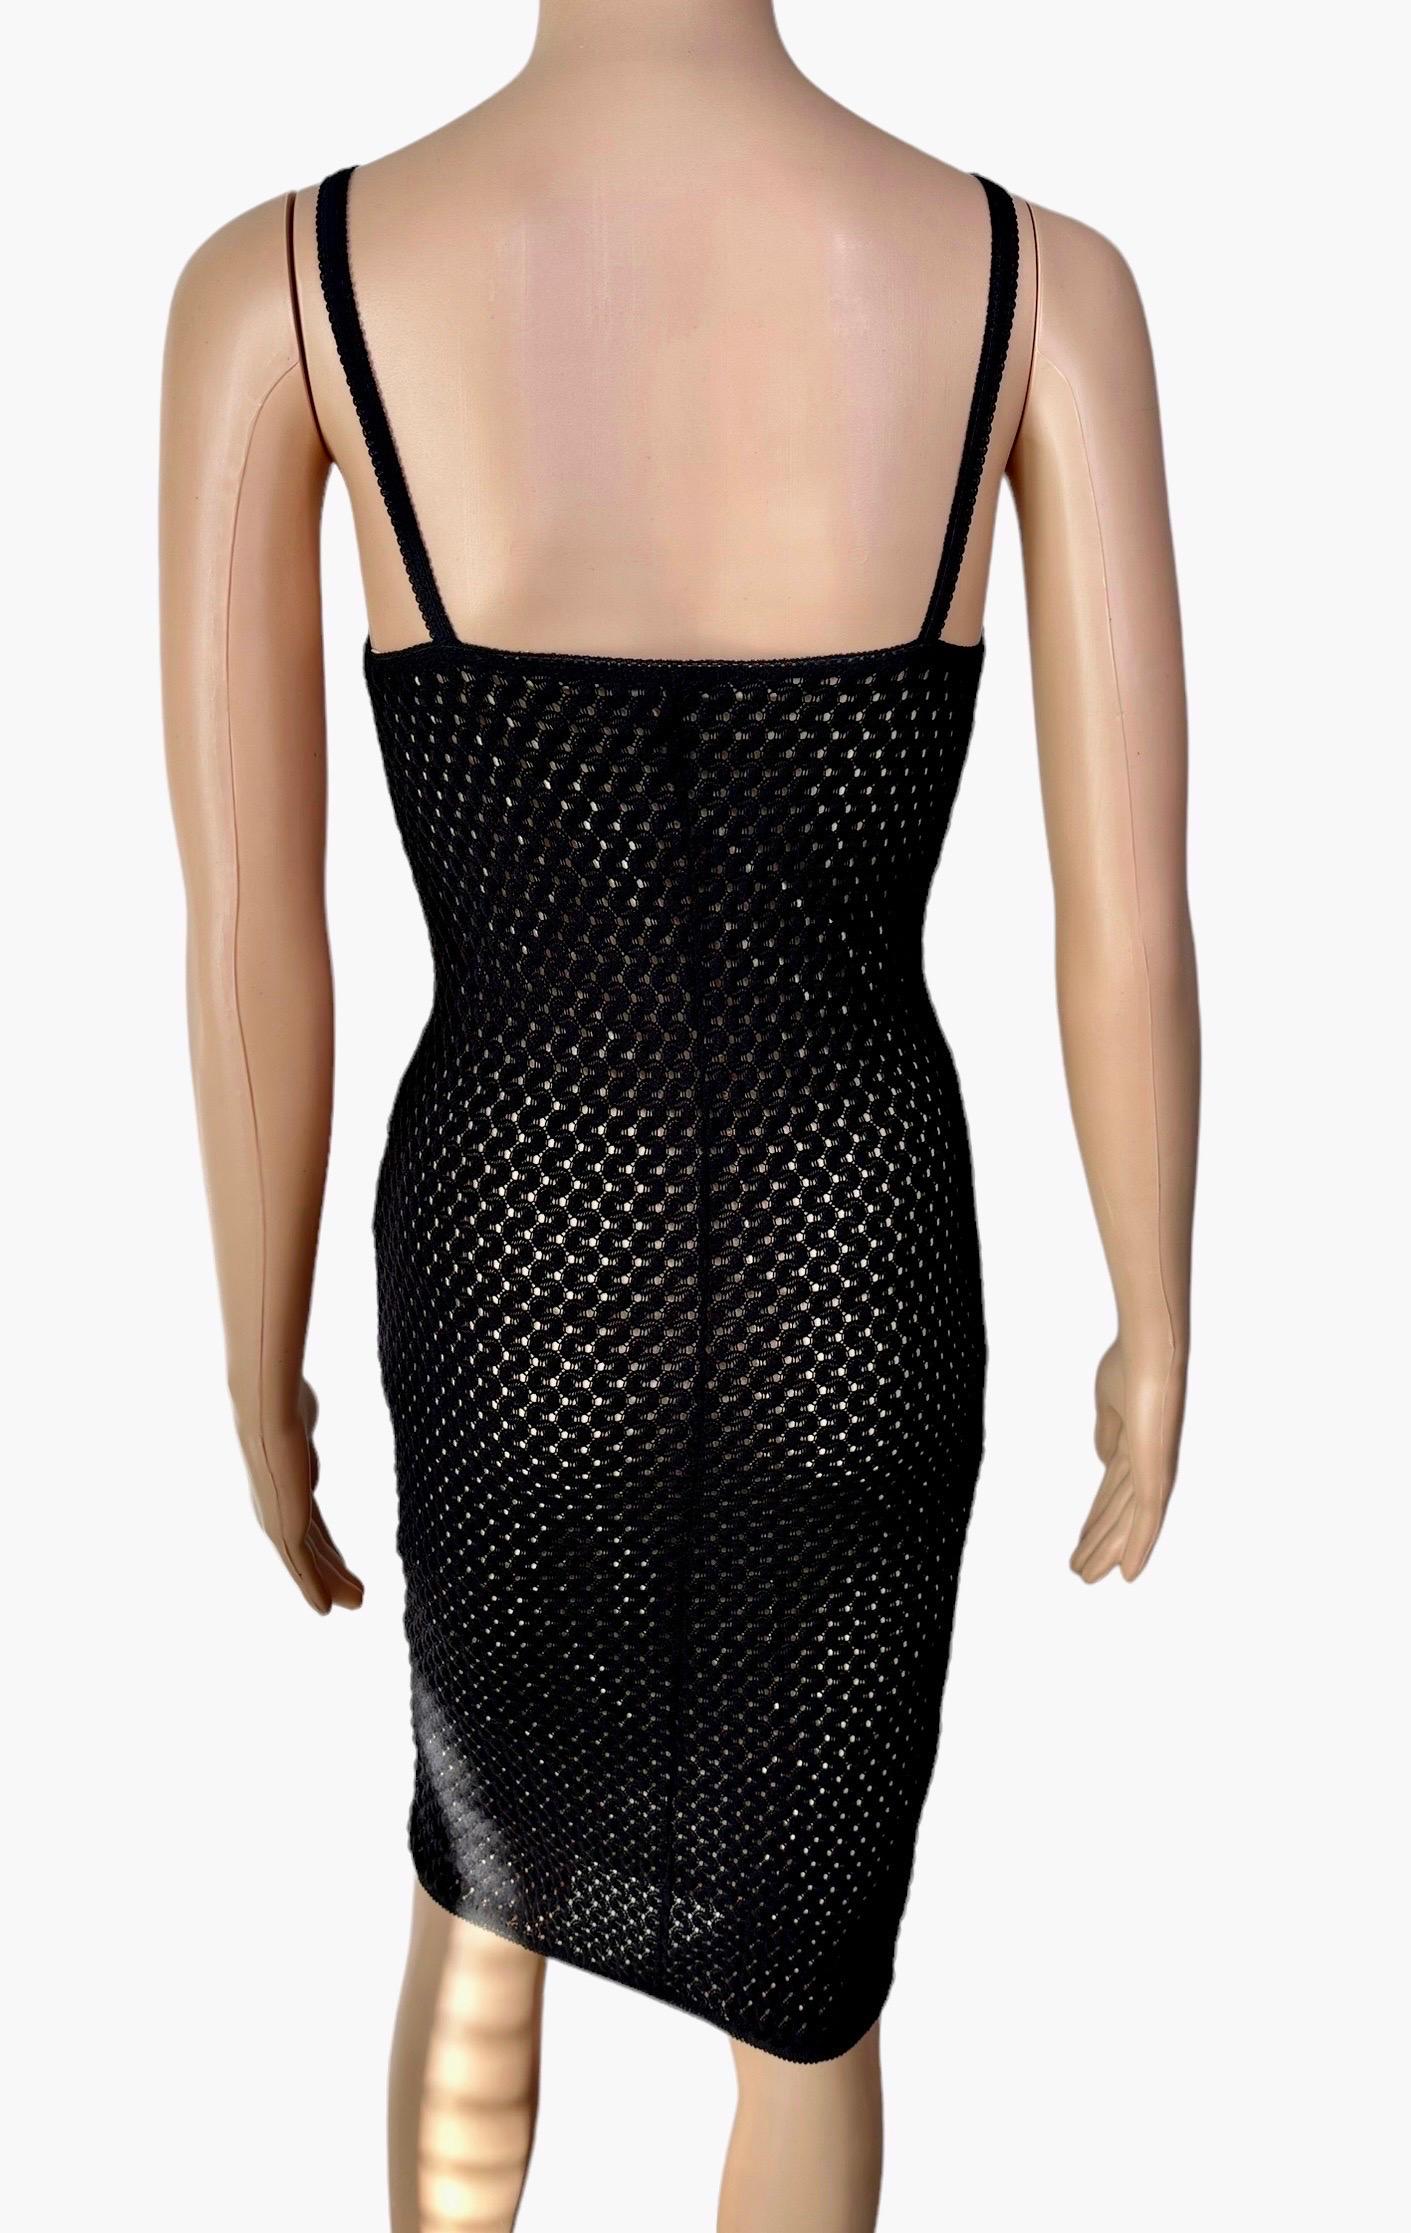 D&G by Dolce & Gabbana 1990's Sheer Knit Fishnet Virgin Mary Charm Black Dress In Excellent Condition For Sale In Naples, FL